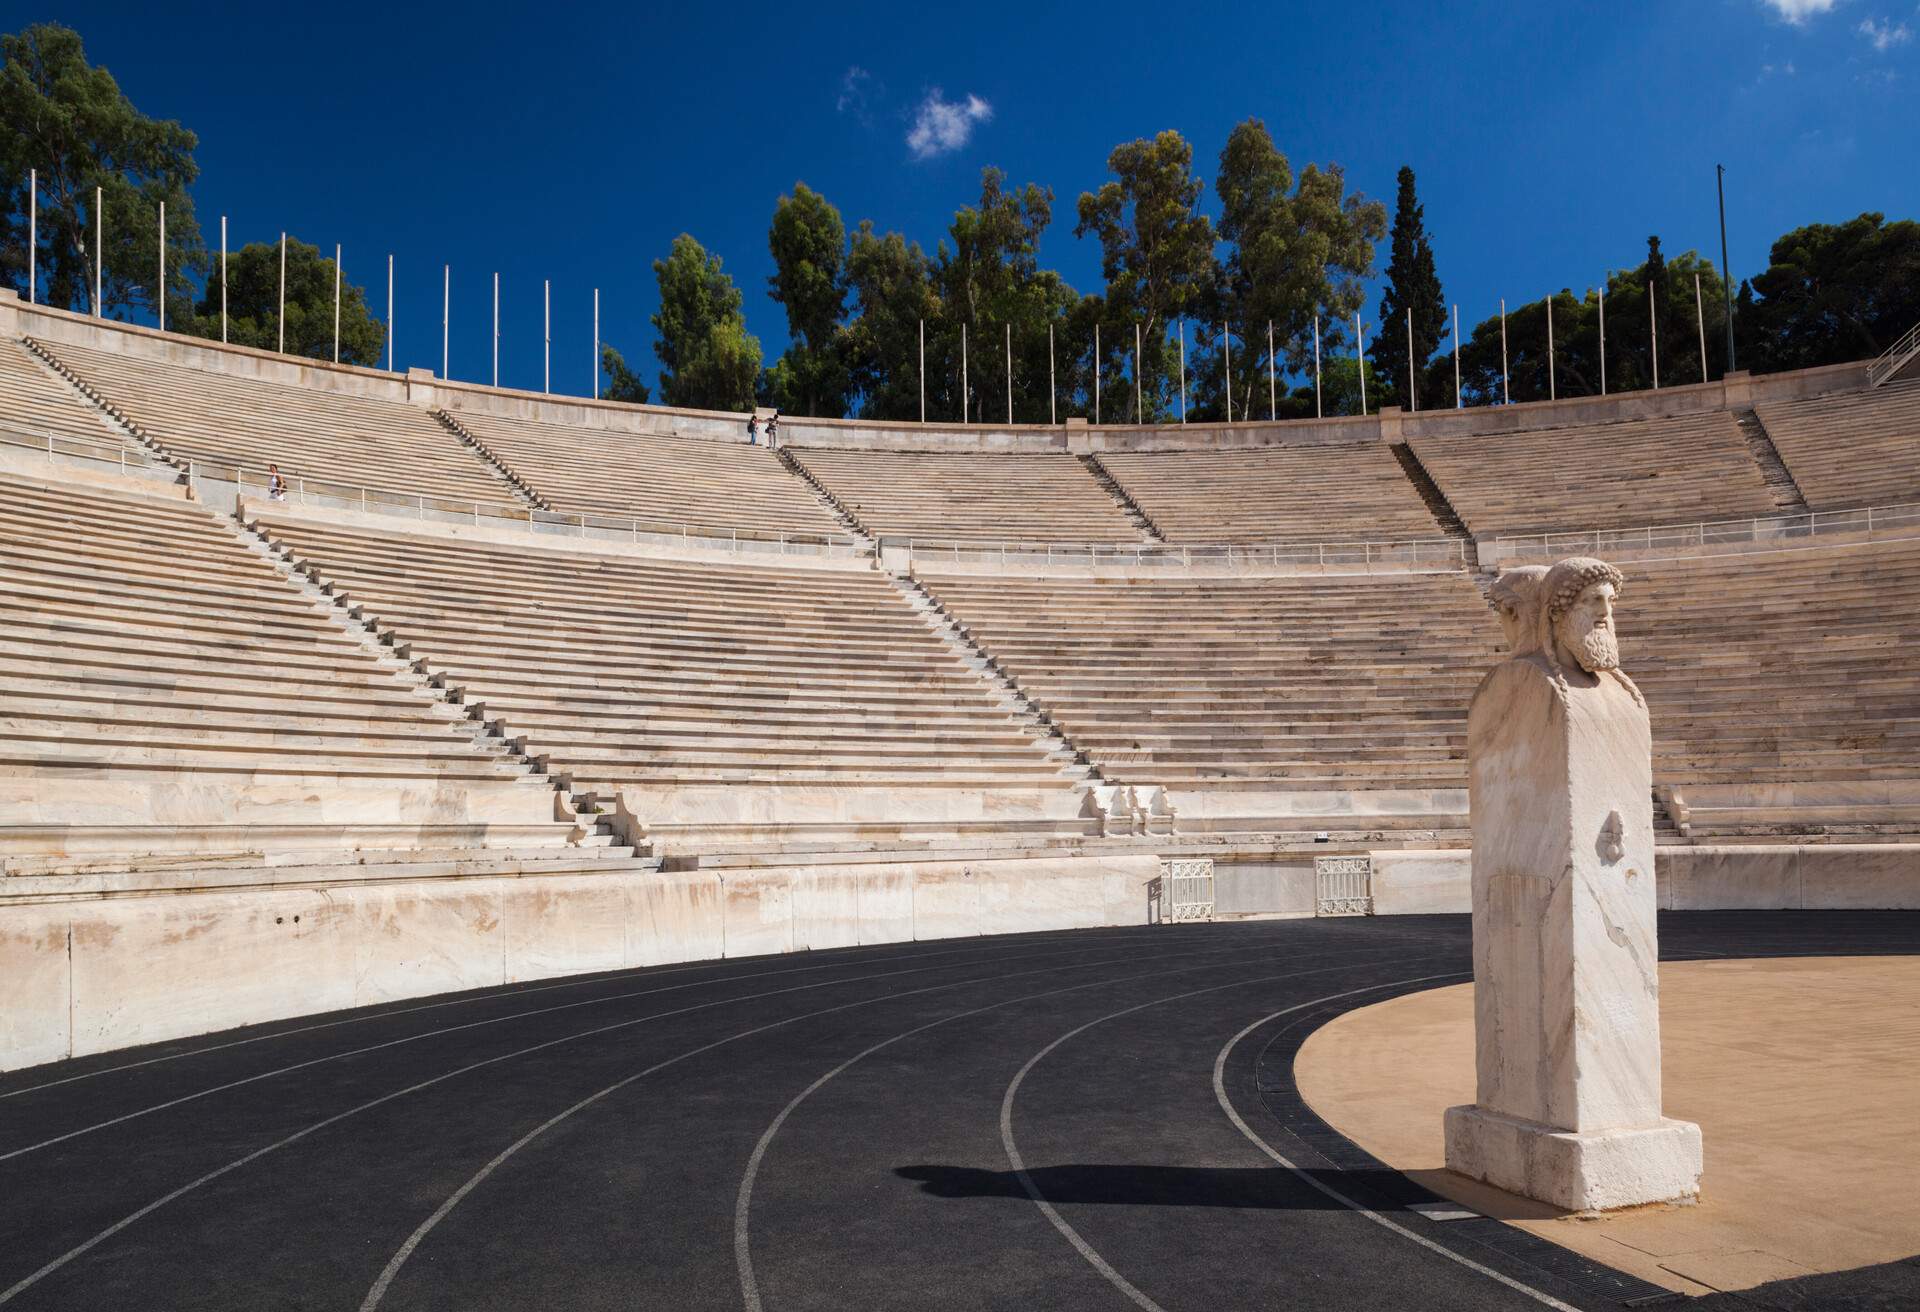 Greece, Central Greece Region, Athens, the Panathenaic Stadium, home of the first modern . Games in 1896.